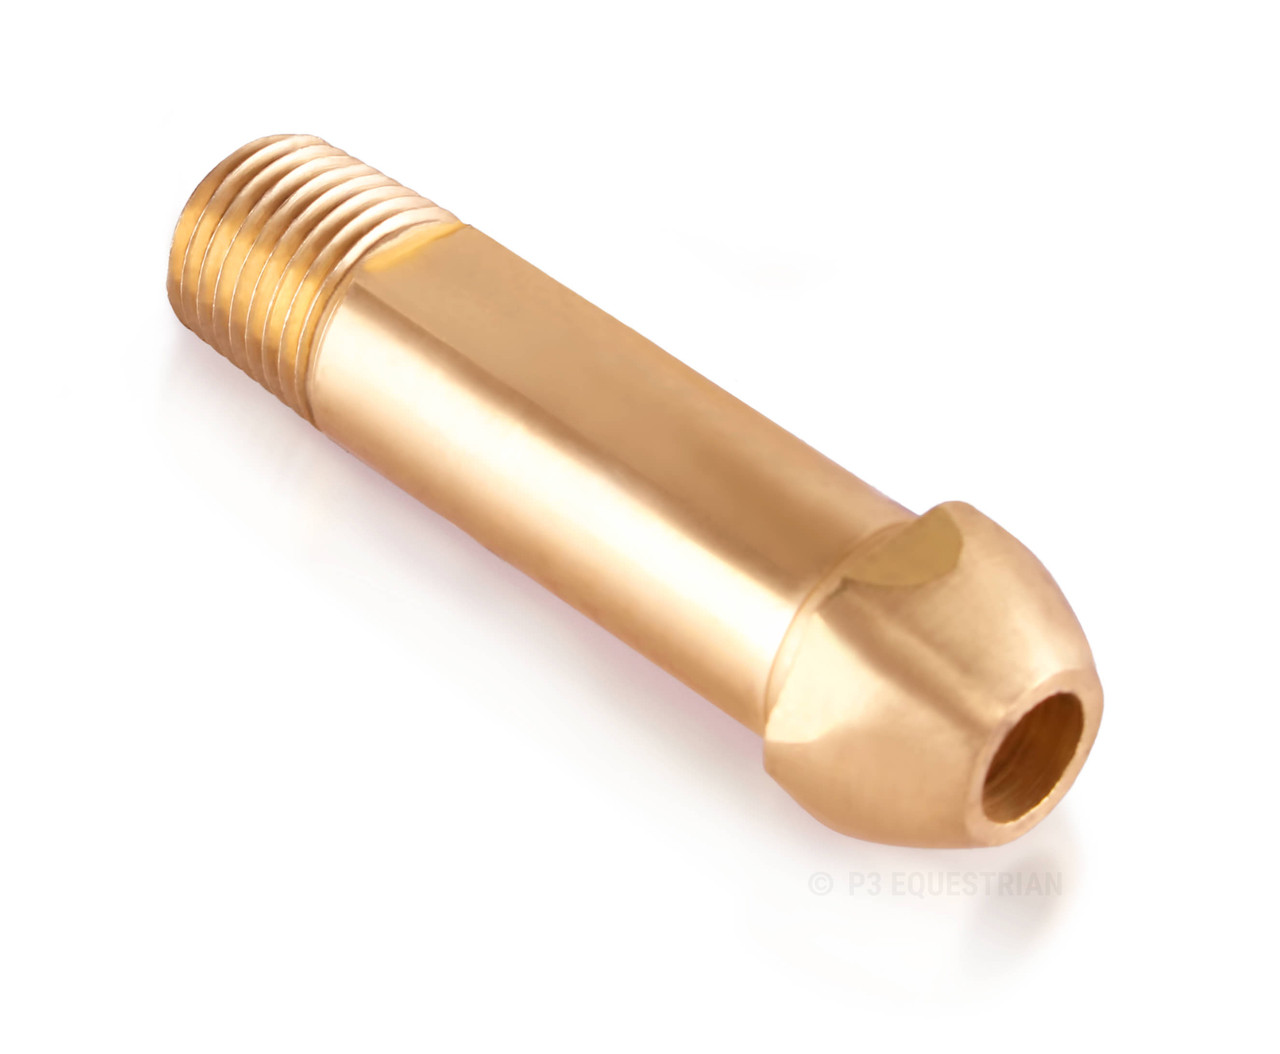 Tank Connector - Gas Forges Australia